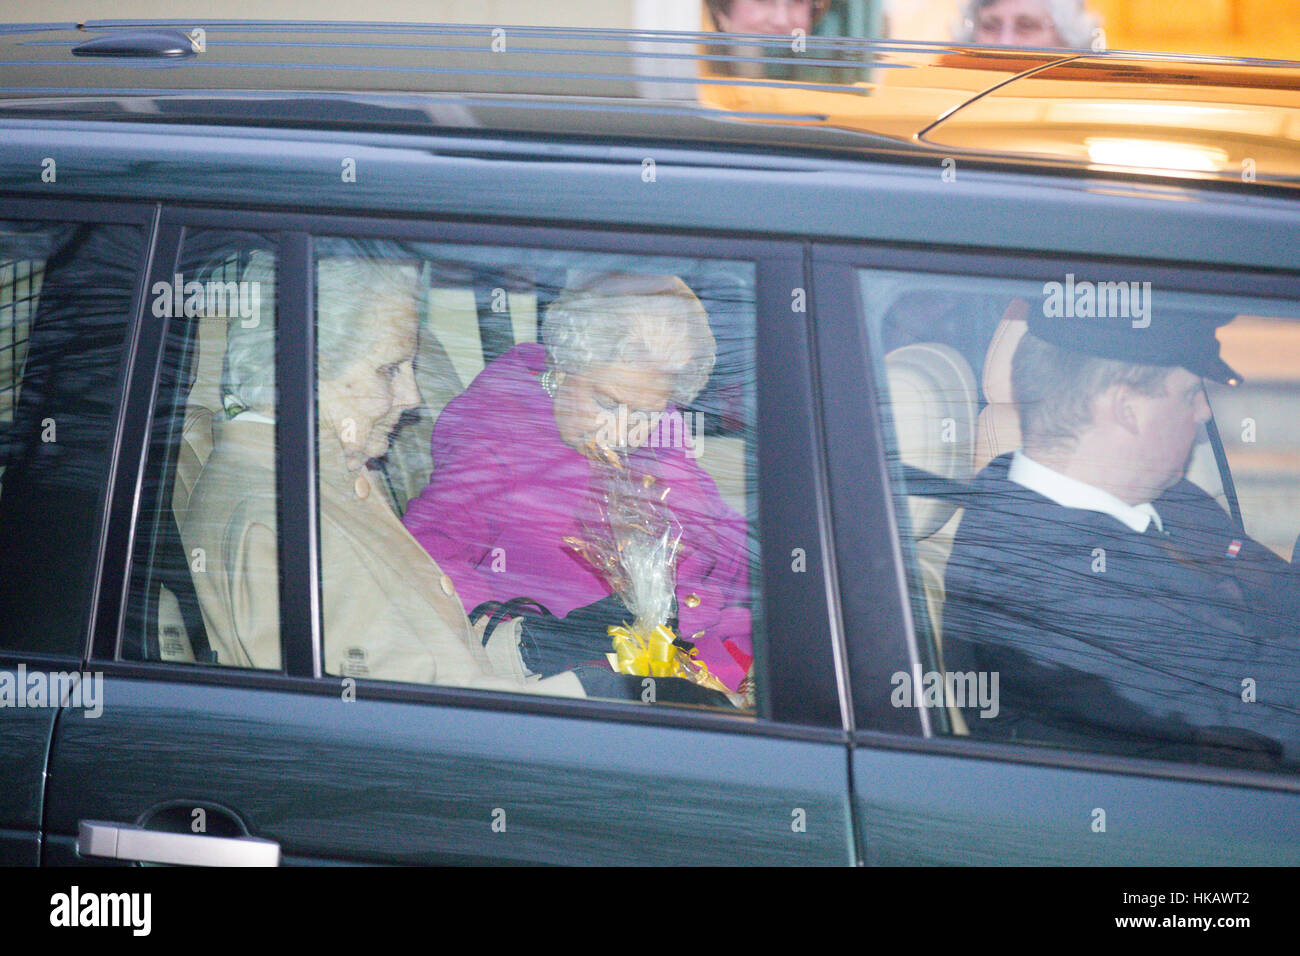 The Queen leaving a meeting of the Women's Institute this afternoon (Thurs) at West Newton village hall in Norfolk. Stock Photo